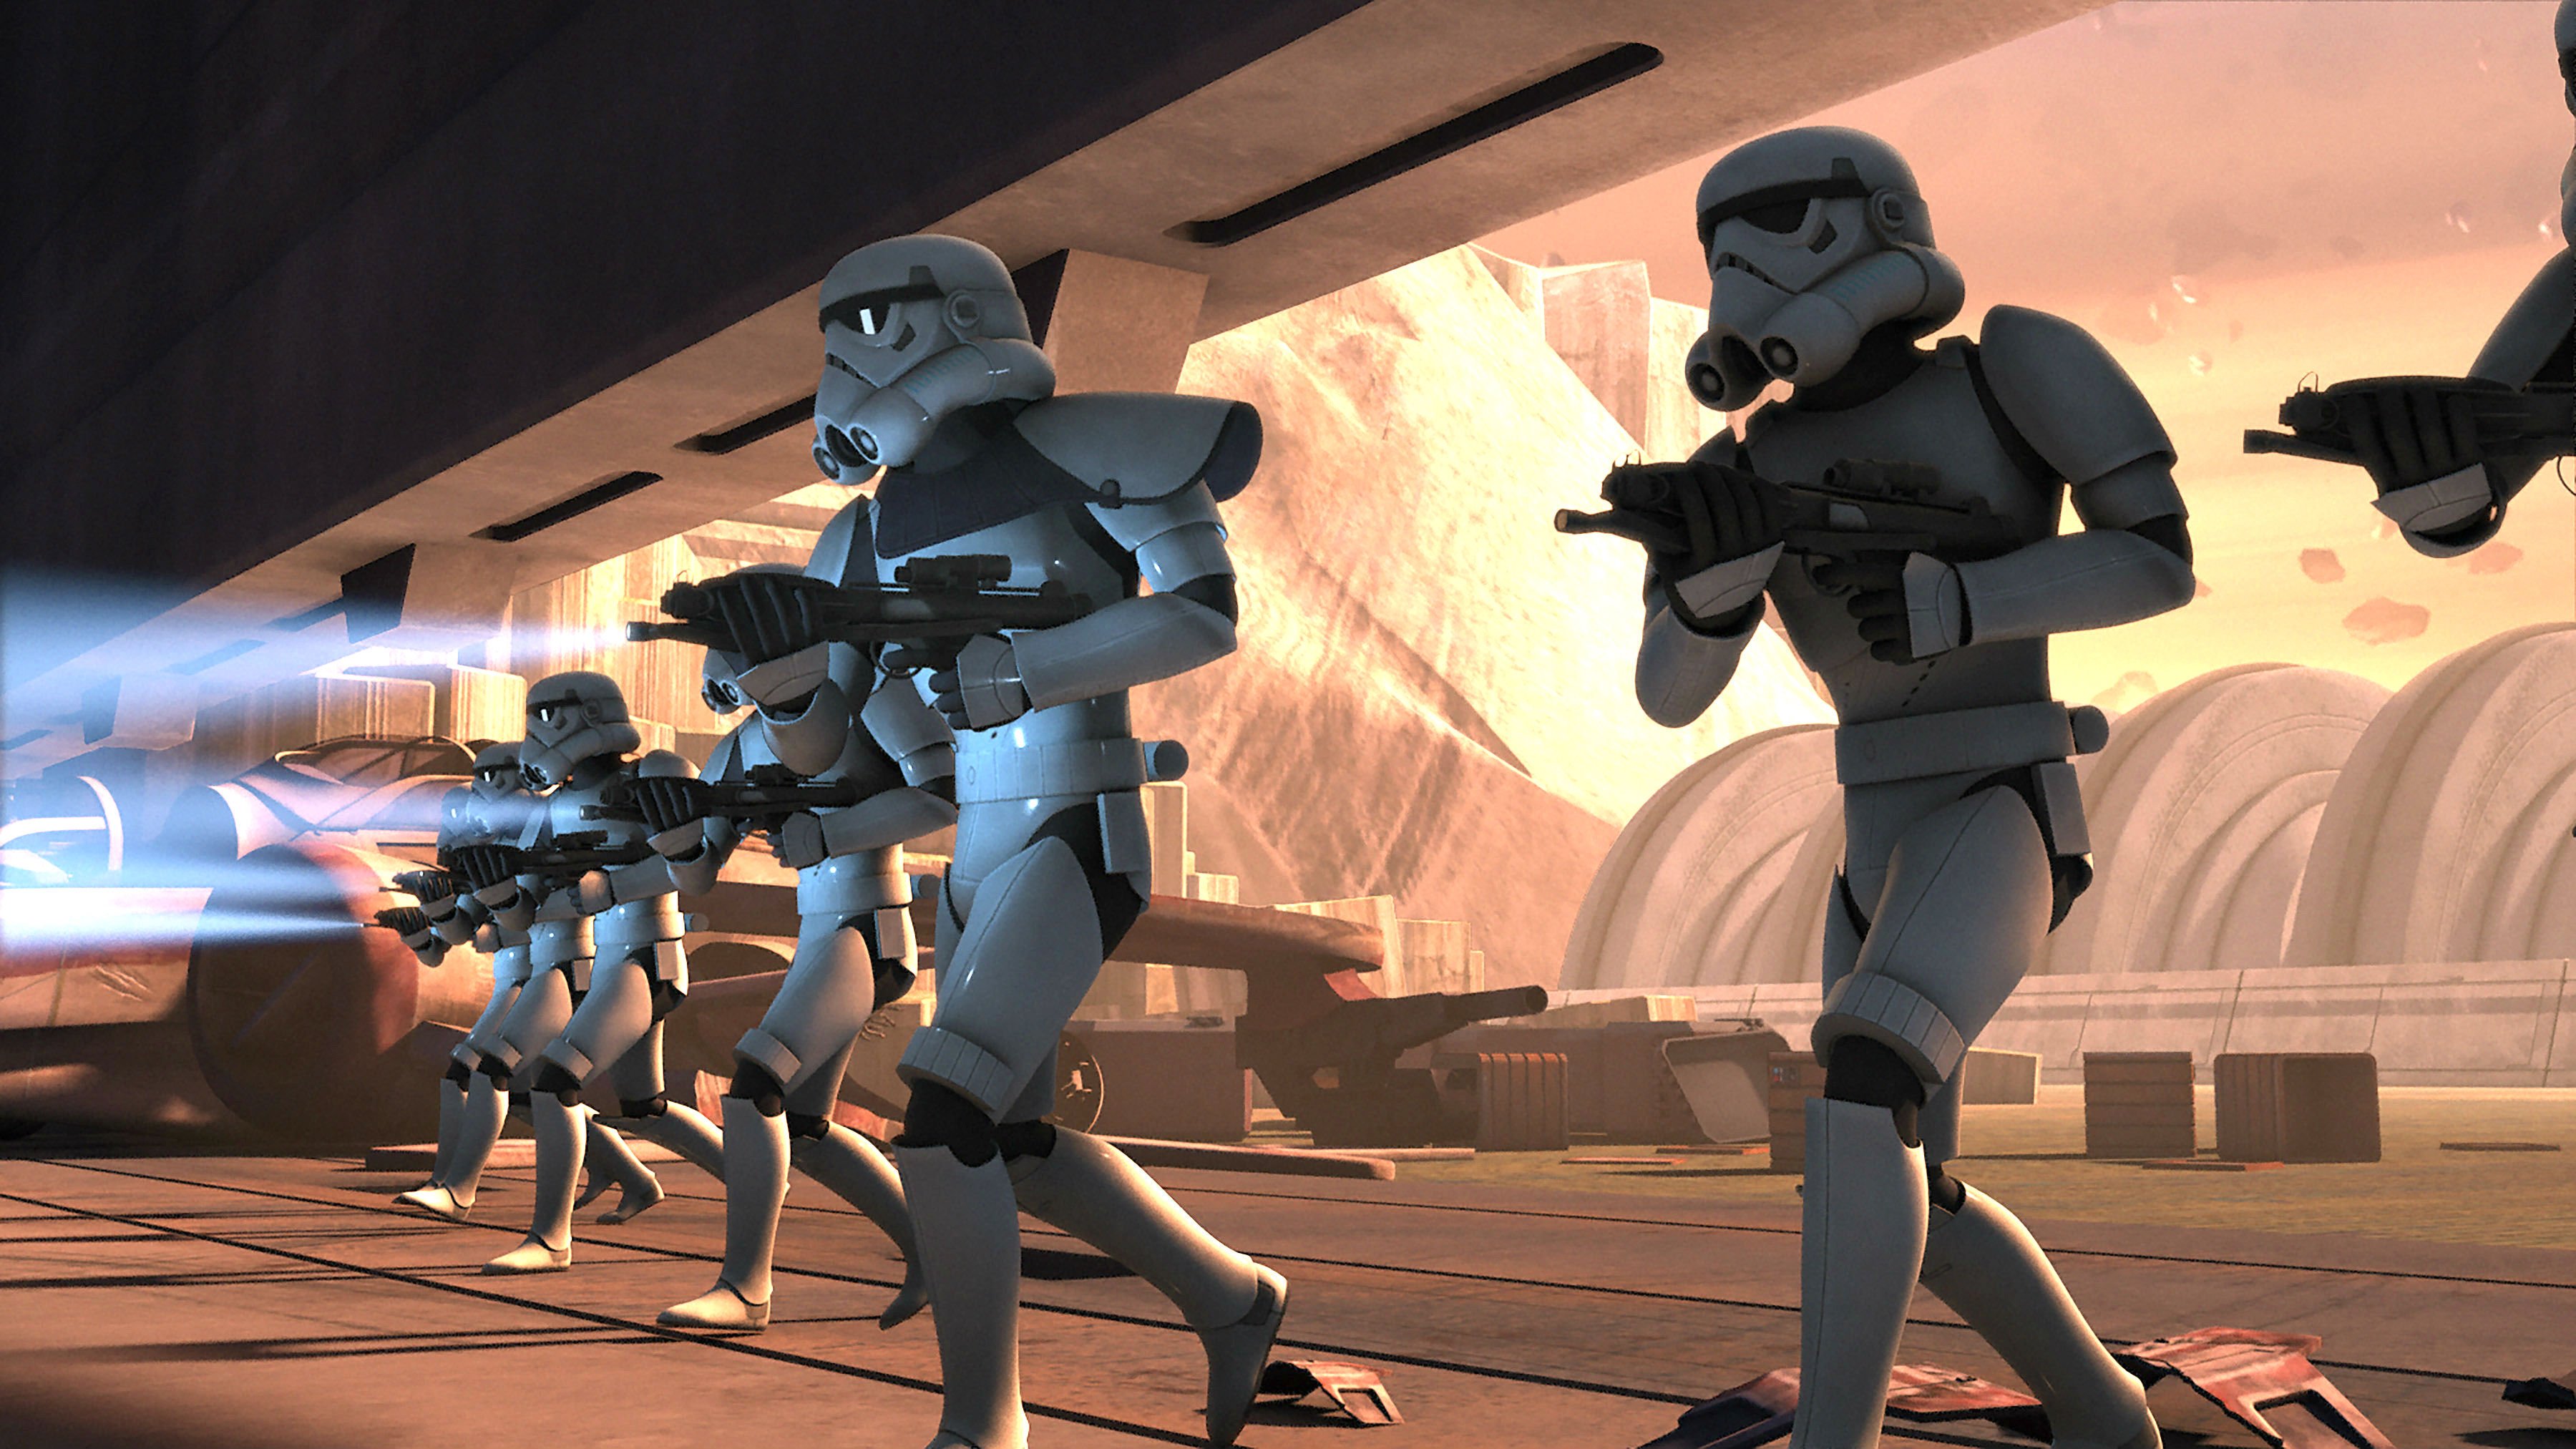 Star Wars Animated Wallpaper Pc - Free Wallpapers HD